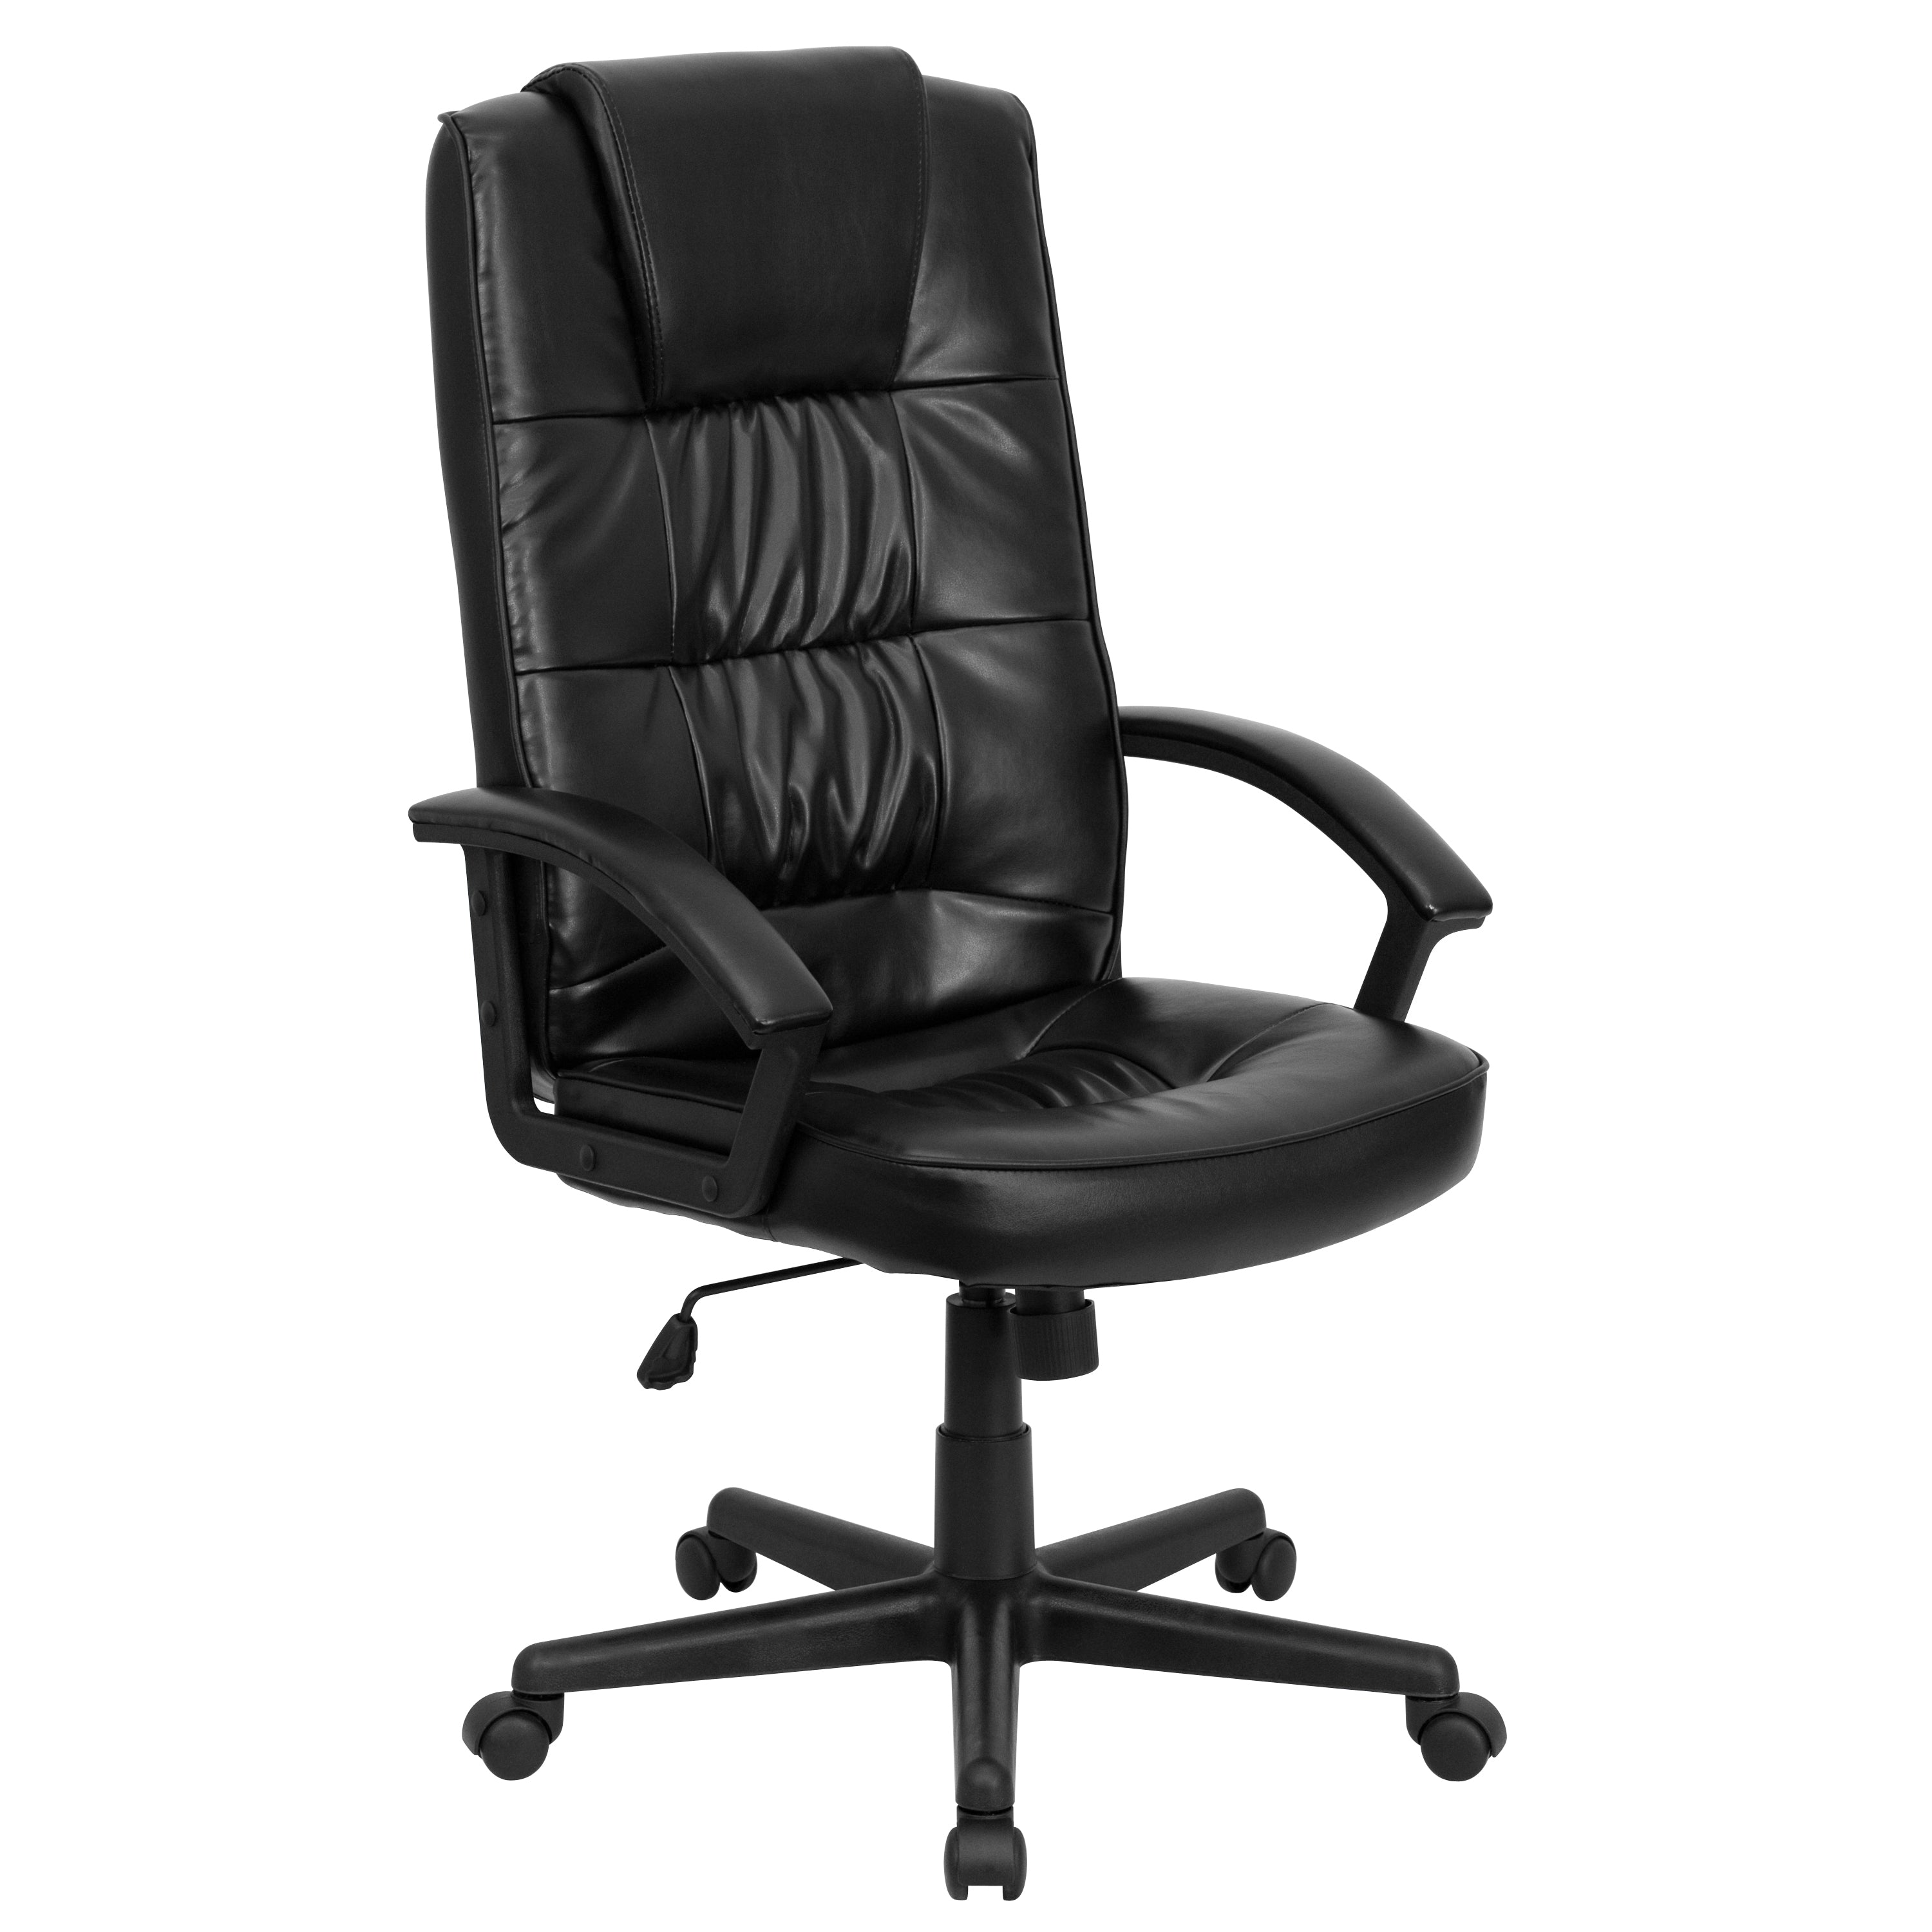 High Back LeatherSoft Soft Ripple Upholstered Executive Swivel Office Chair with Arms-Office Chair-Flash Furniture-Wall2Wall Furnishings